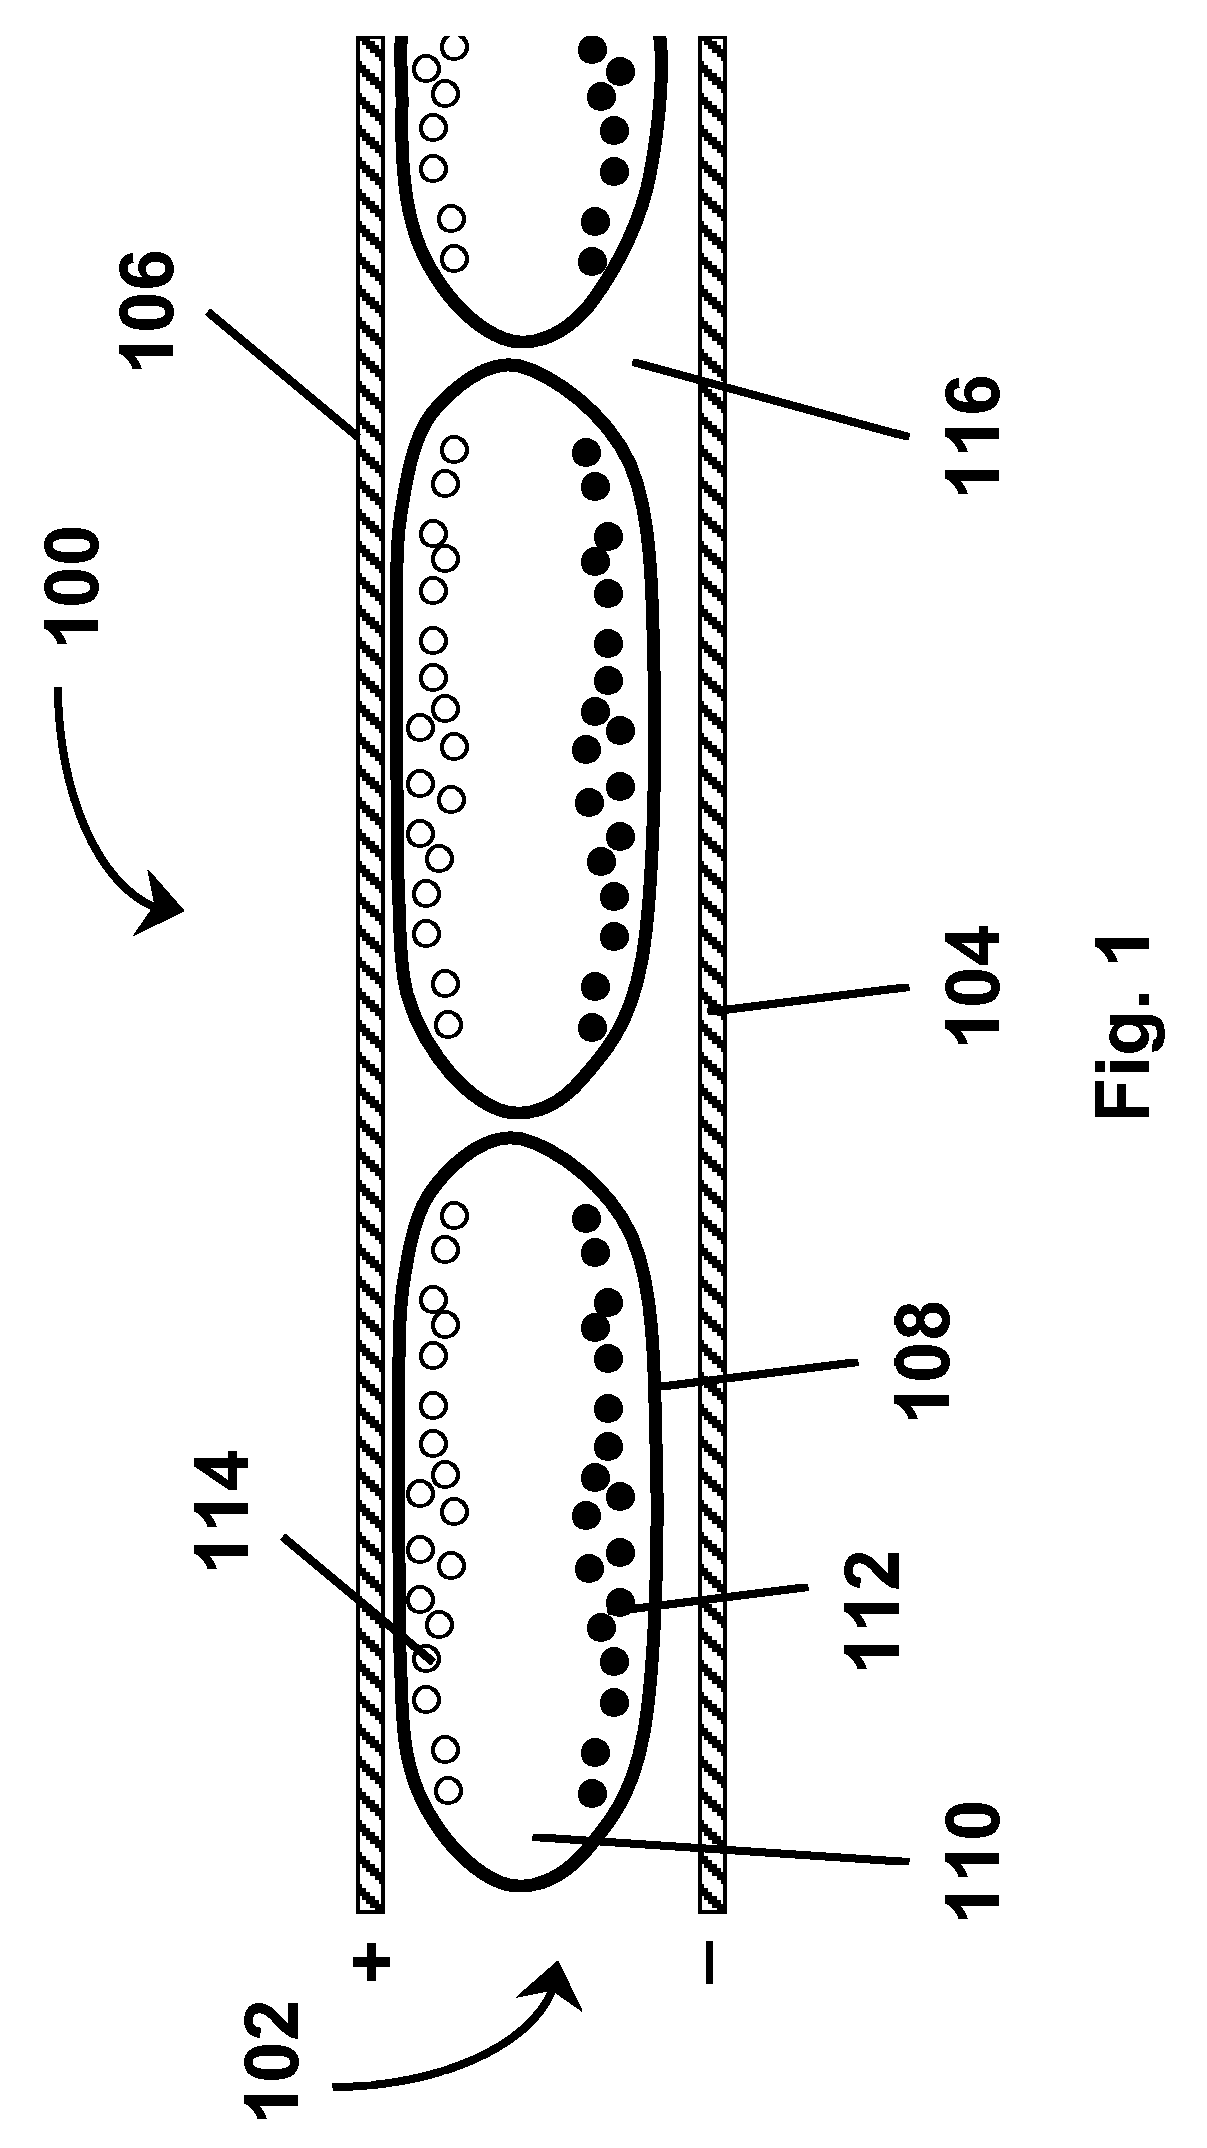 Methods for driving electrophoretic displays using dielectrophoretic forces